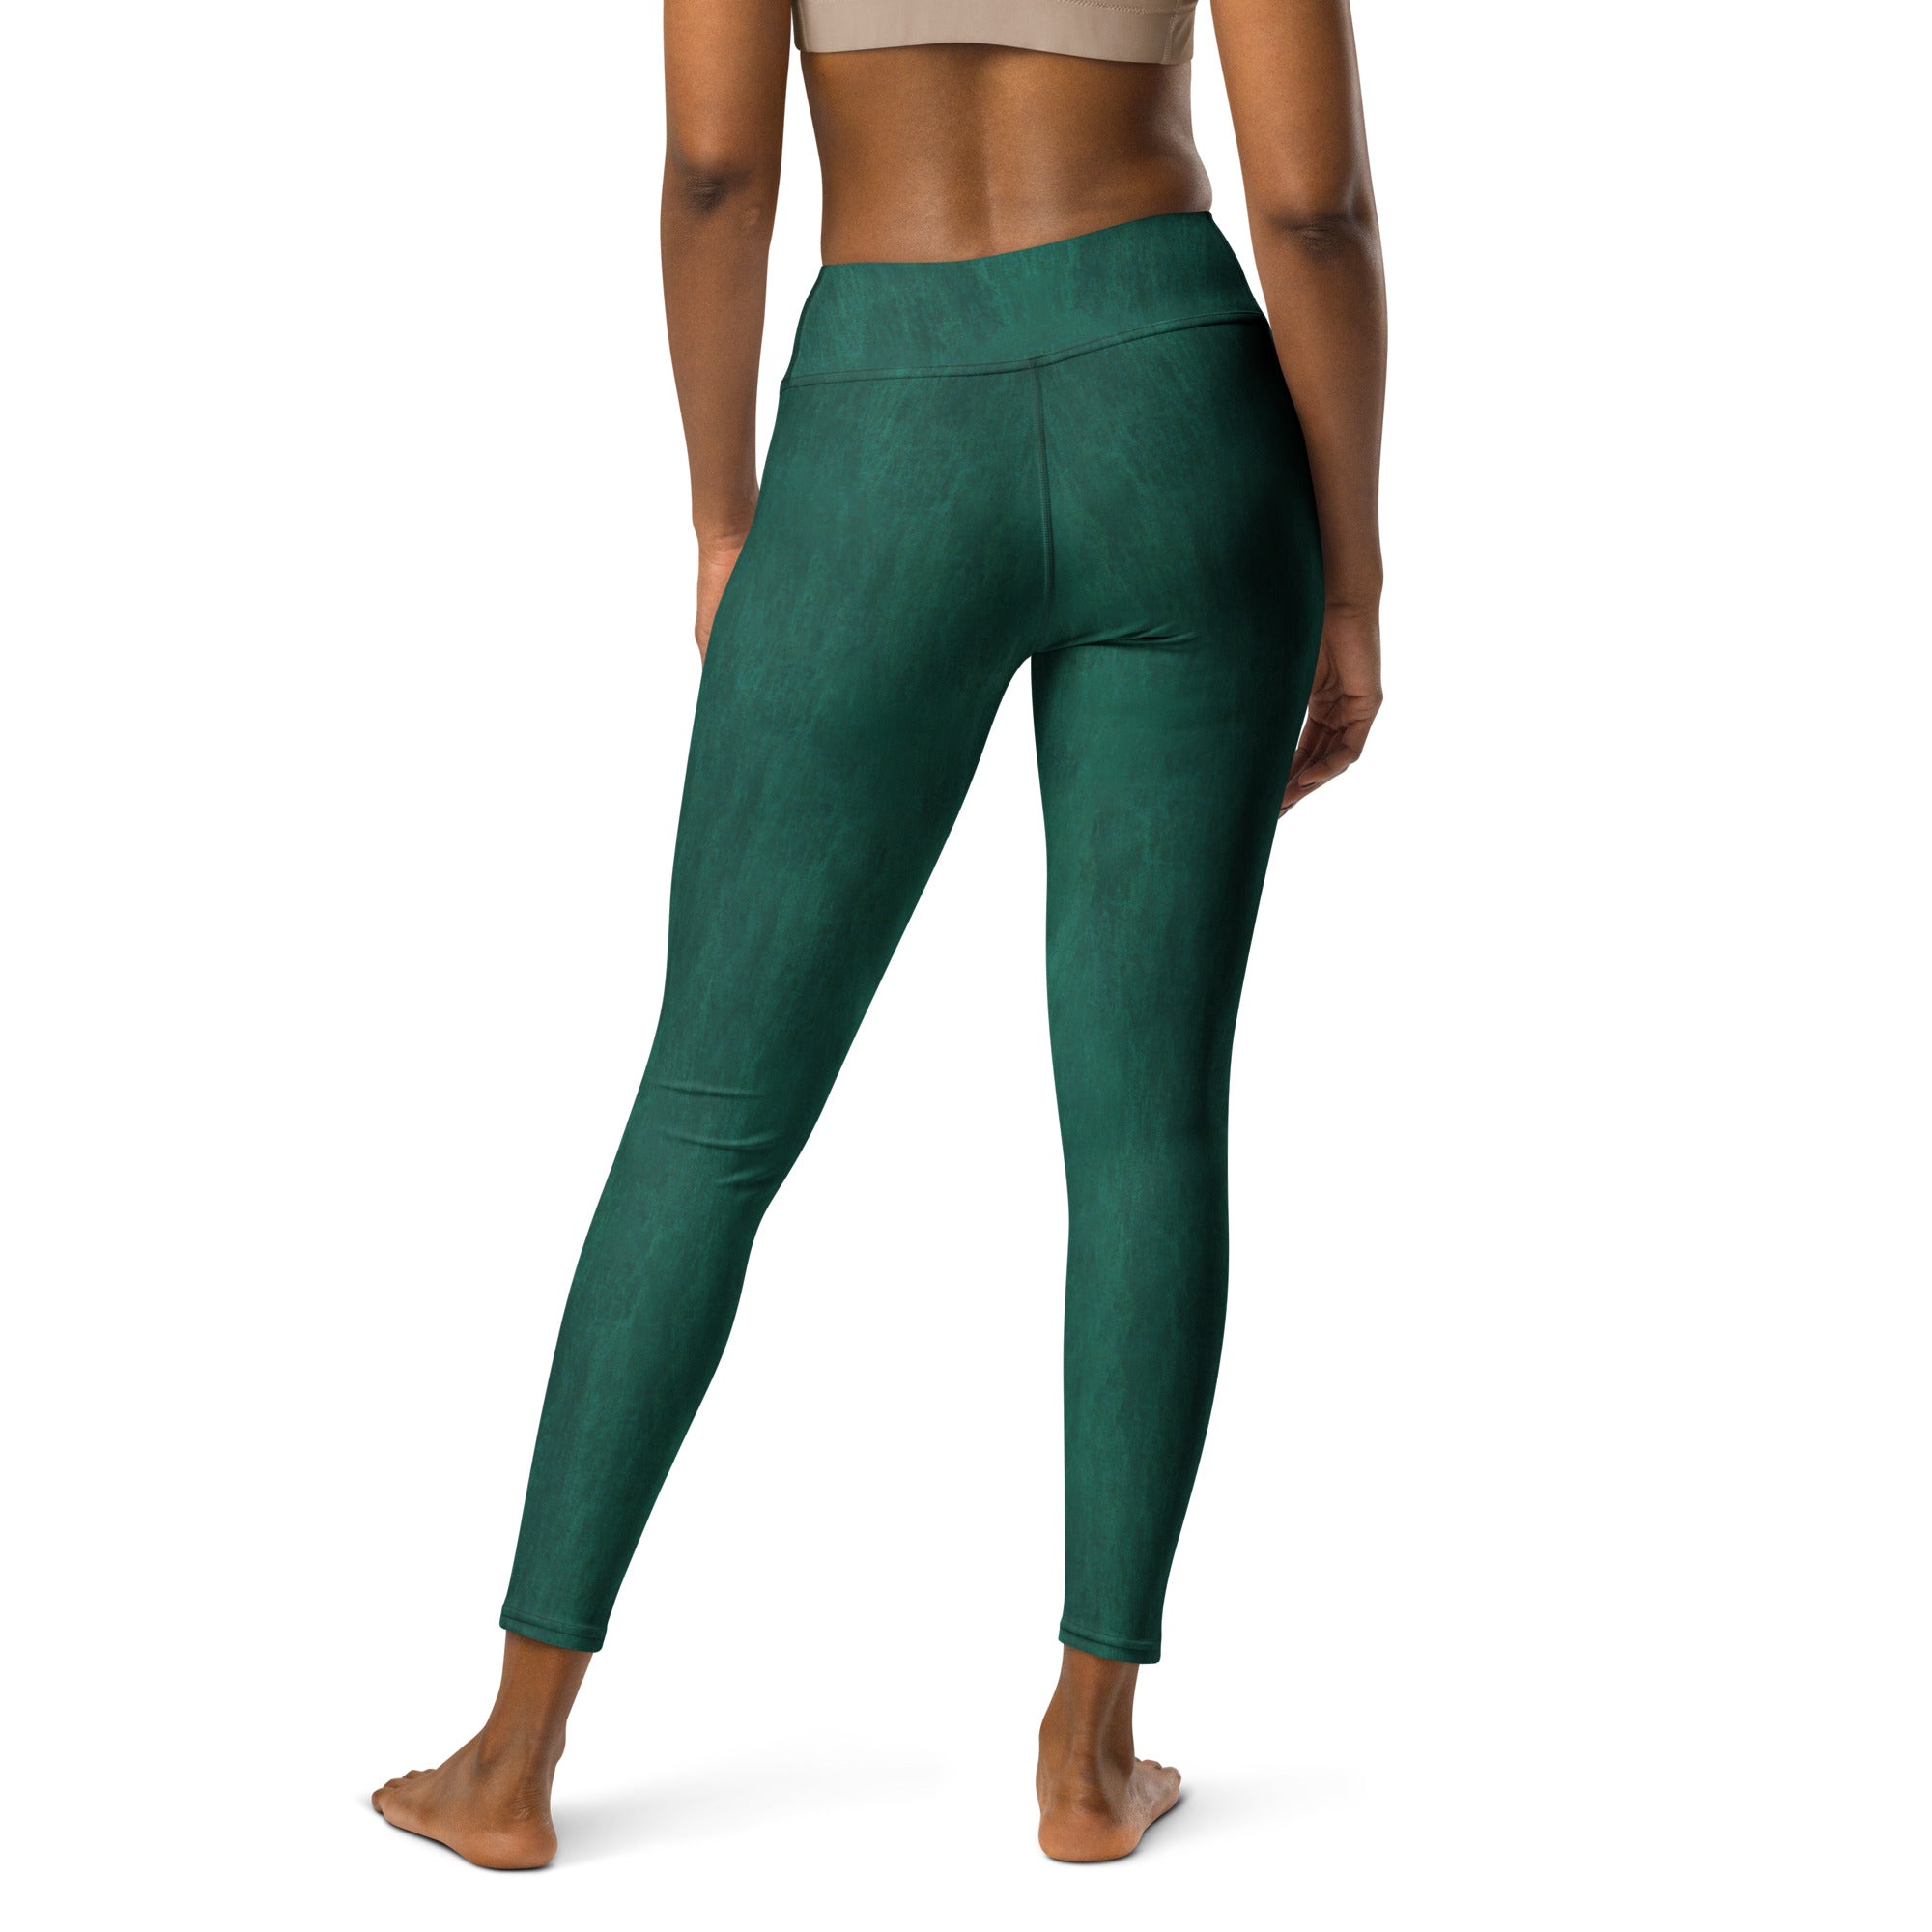 Stretchable and Comfortable Marble Yoga Leggings Detail